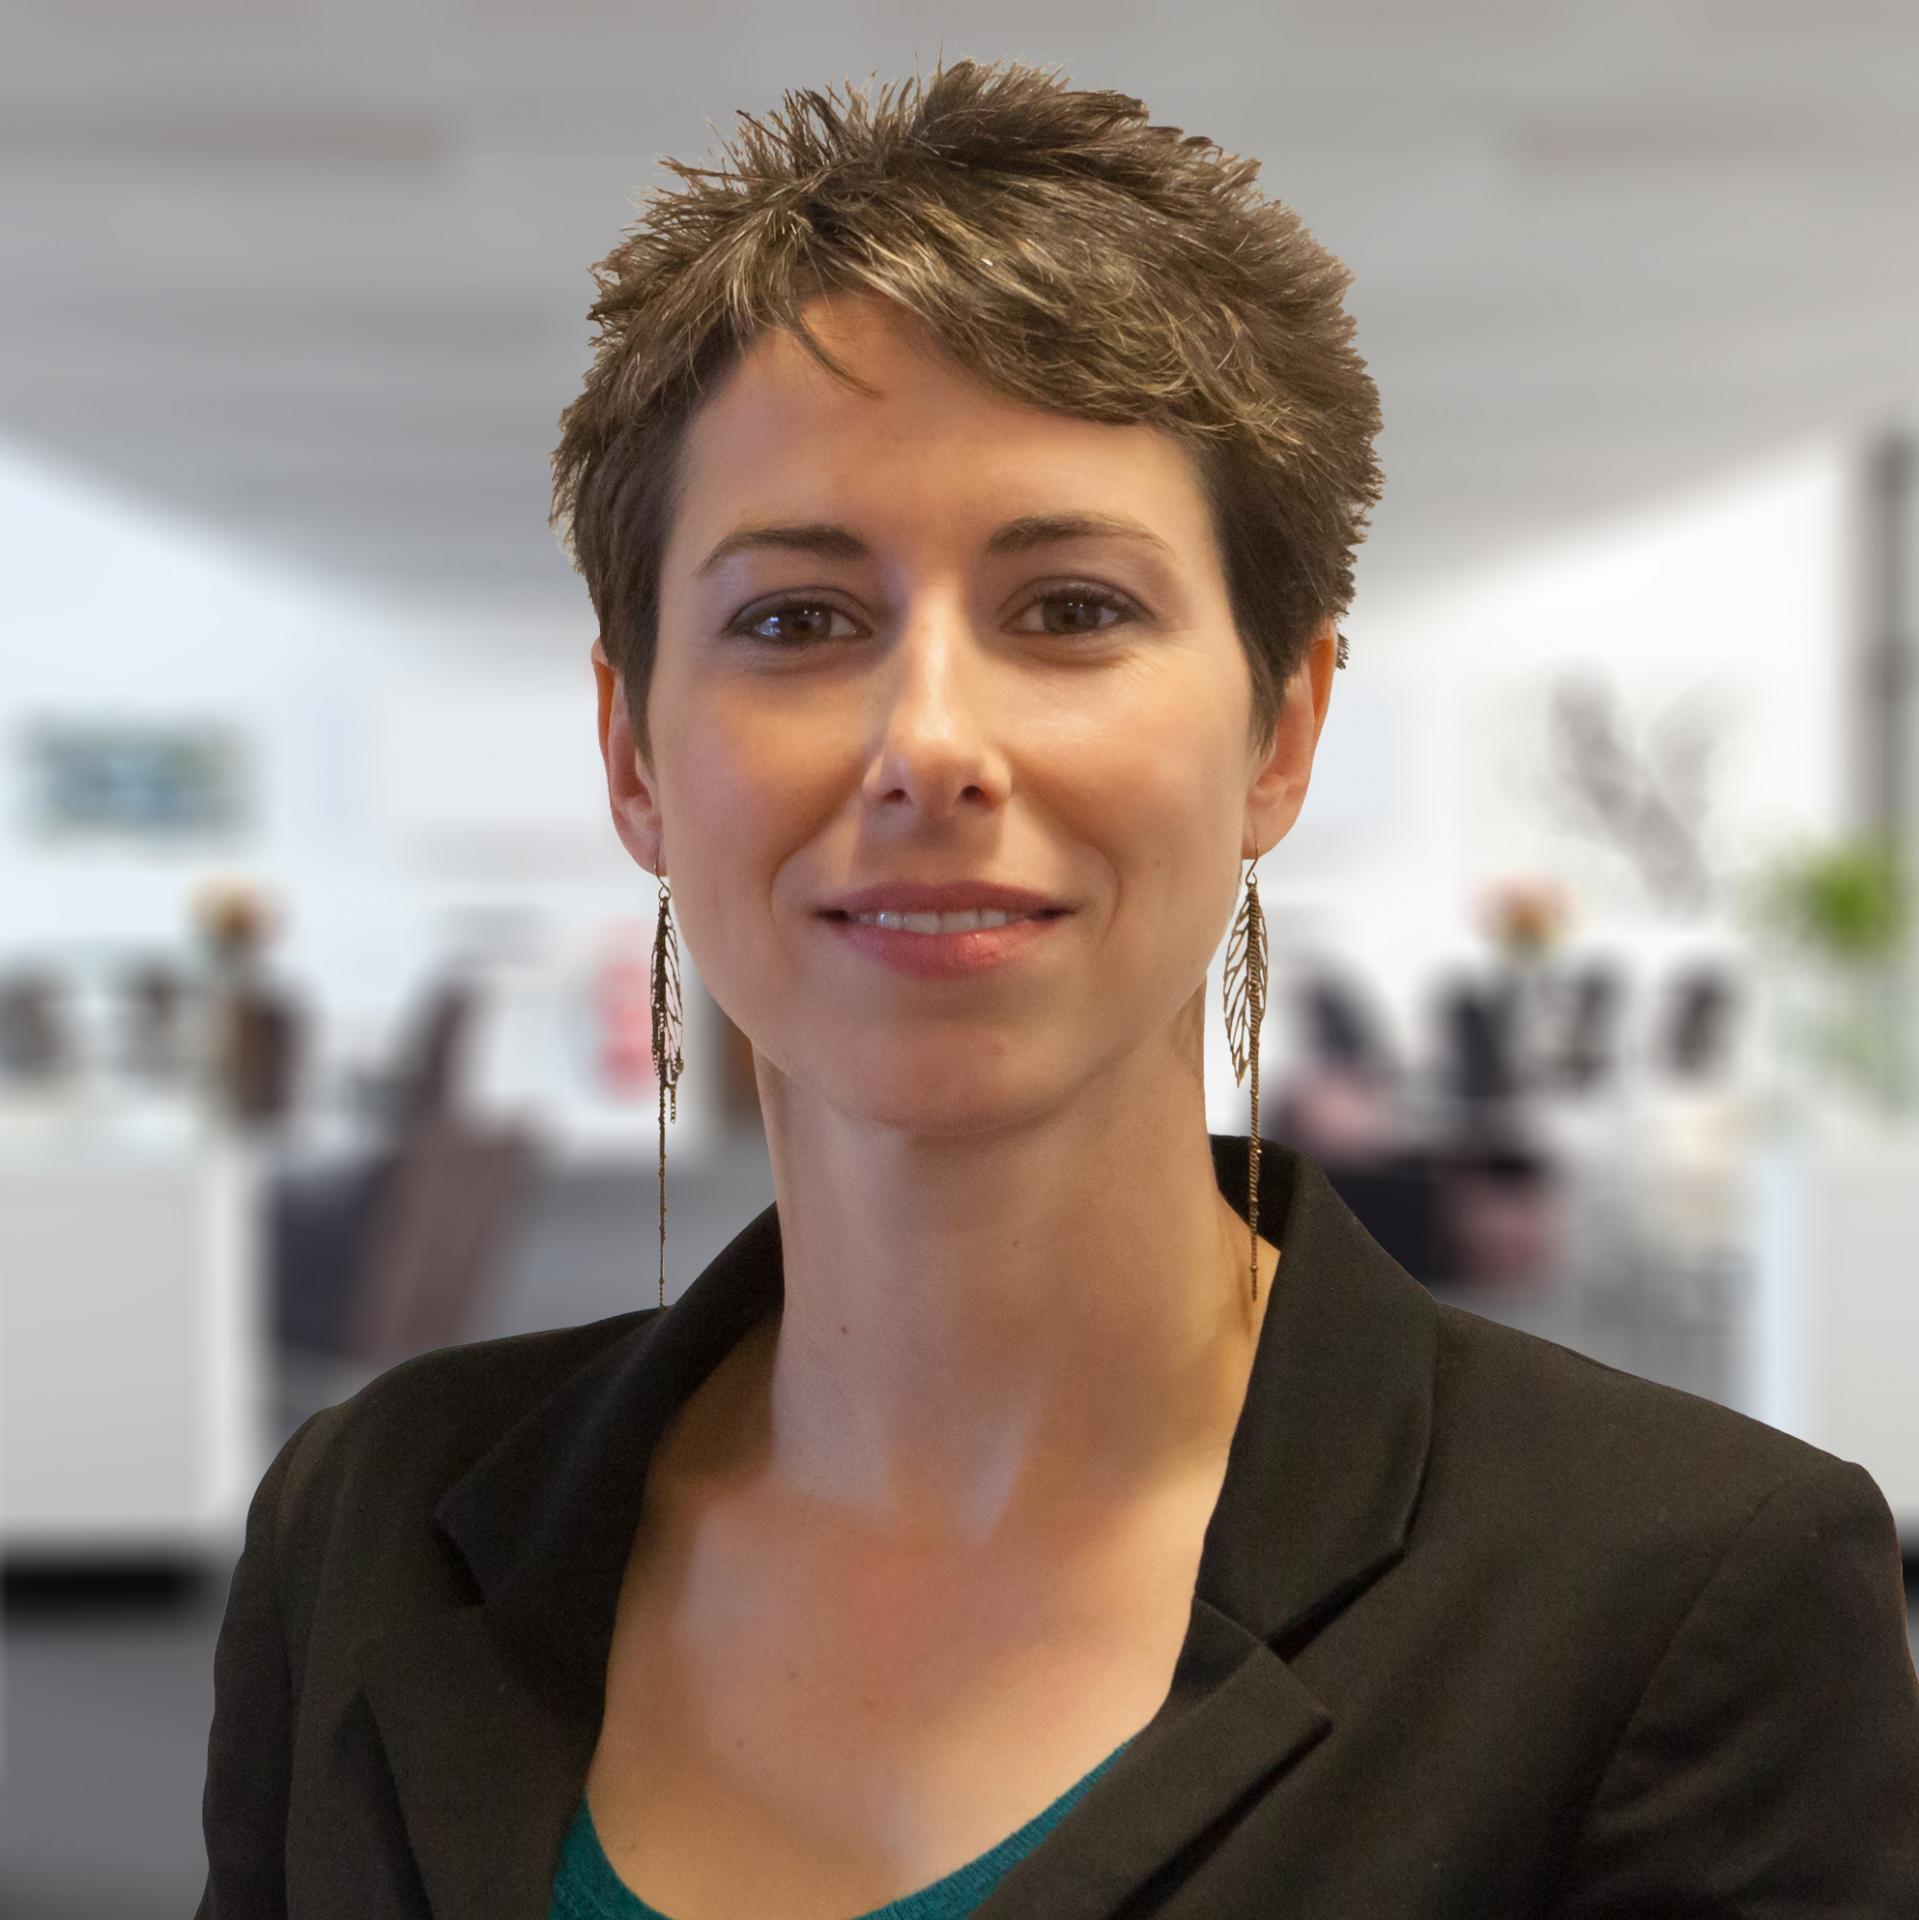 Laetitia Kimblad started working at Välinge Innovation in 2012 as a Key Account Manager, supporting licensees who wanted to implement Välinge’s locking technologies in their flooring products in Europe and South America. In 2016, she became responsible for the business unit Floor Locking, tightly working with colleagues from the entire organisation, from R&D to Patent, Supply, Marketing and Sales.